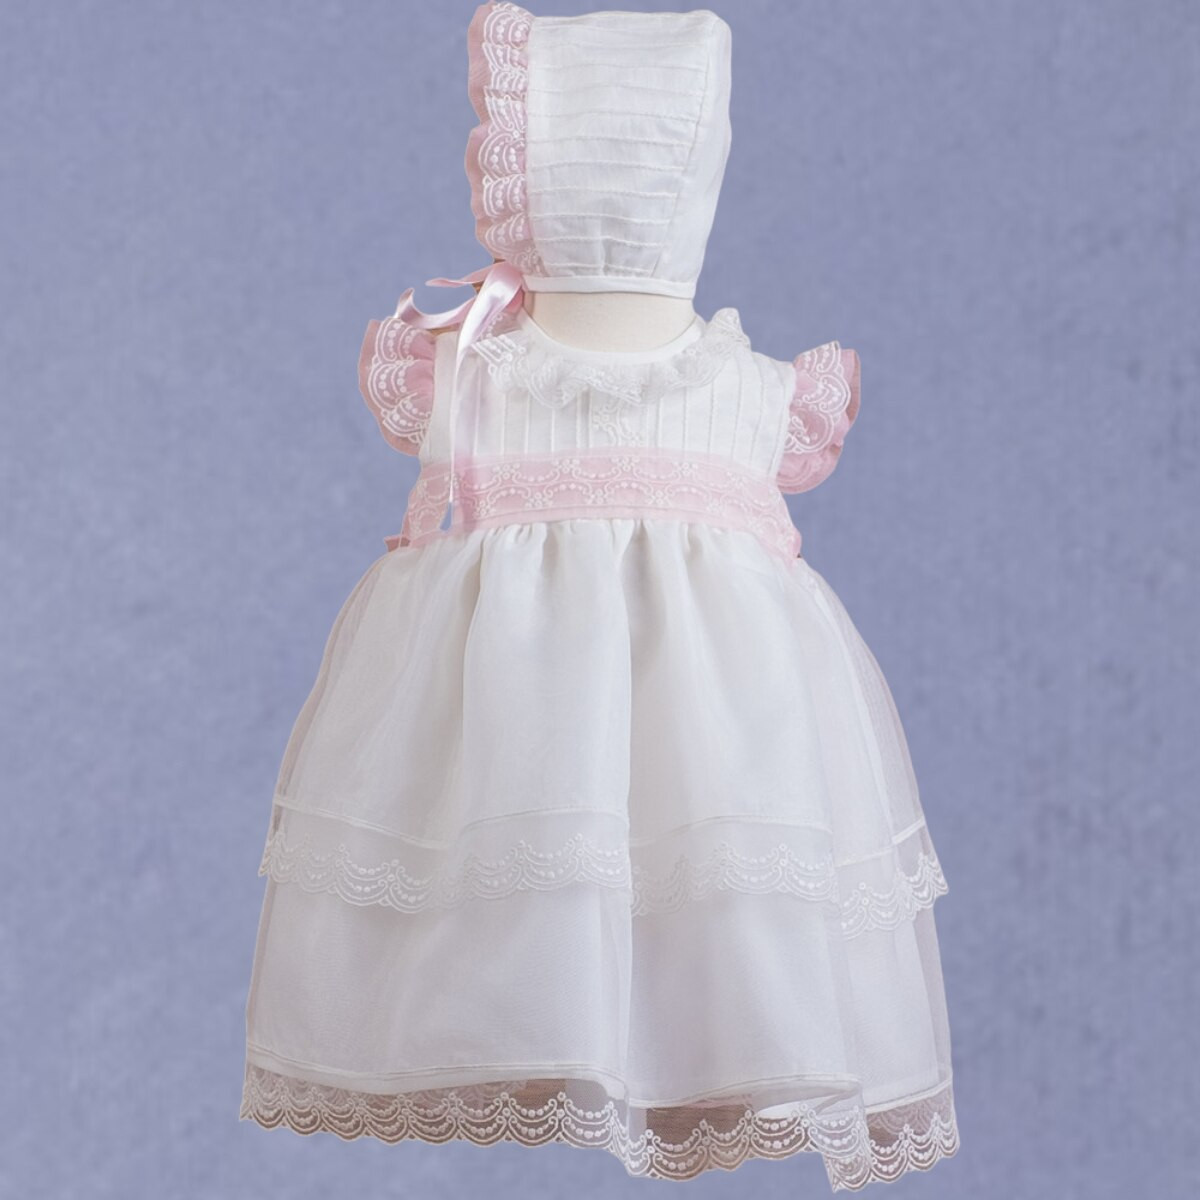 baby girls christening crystal gown with bonnet MISHA BABY - 1